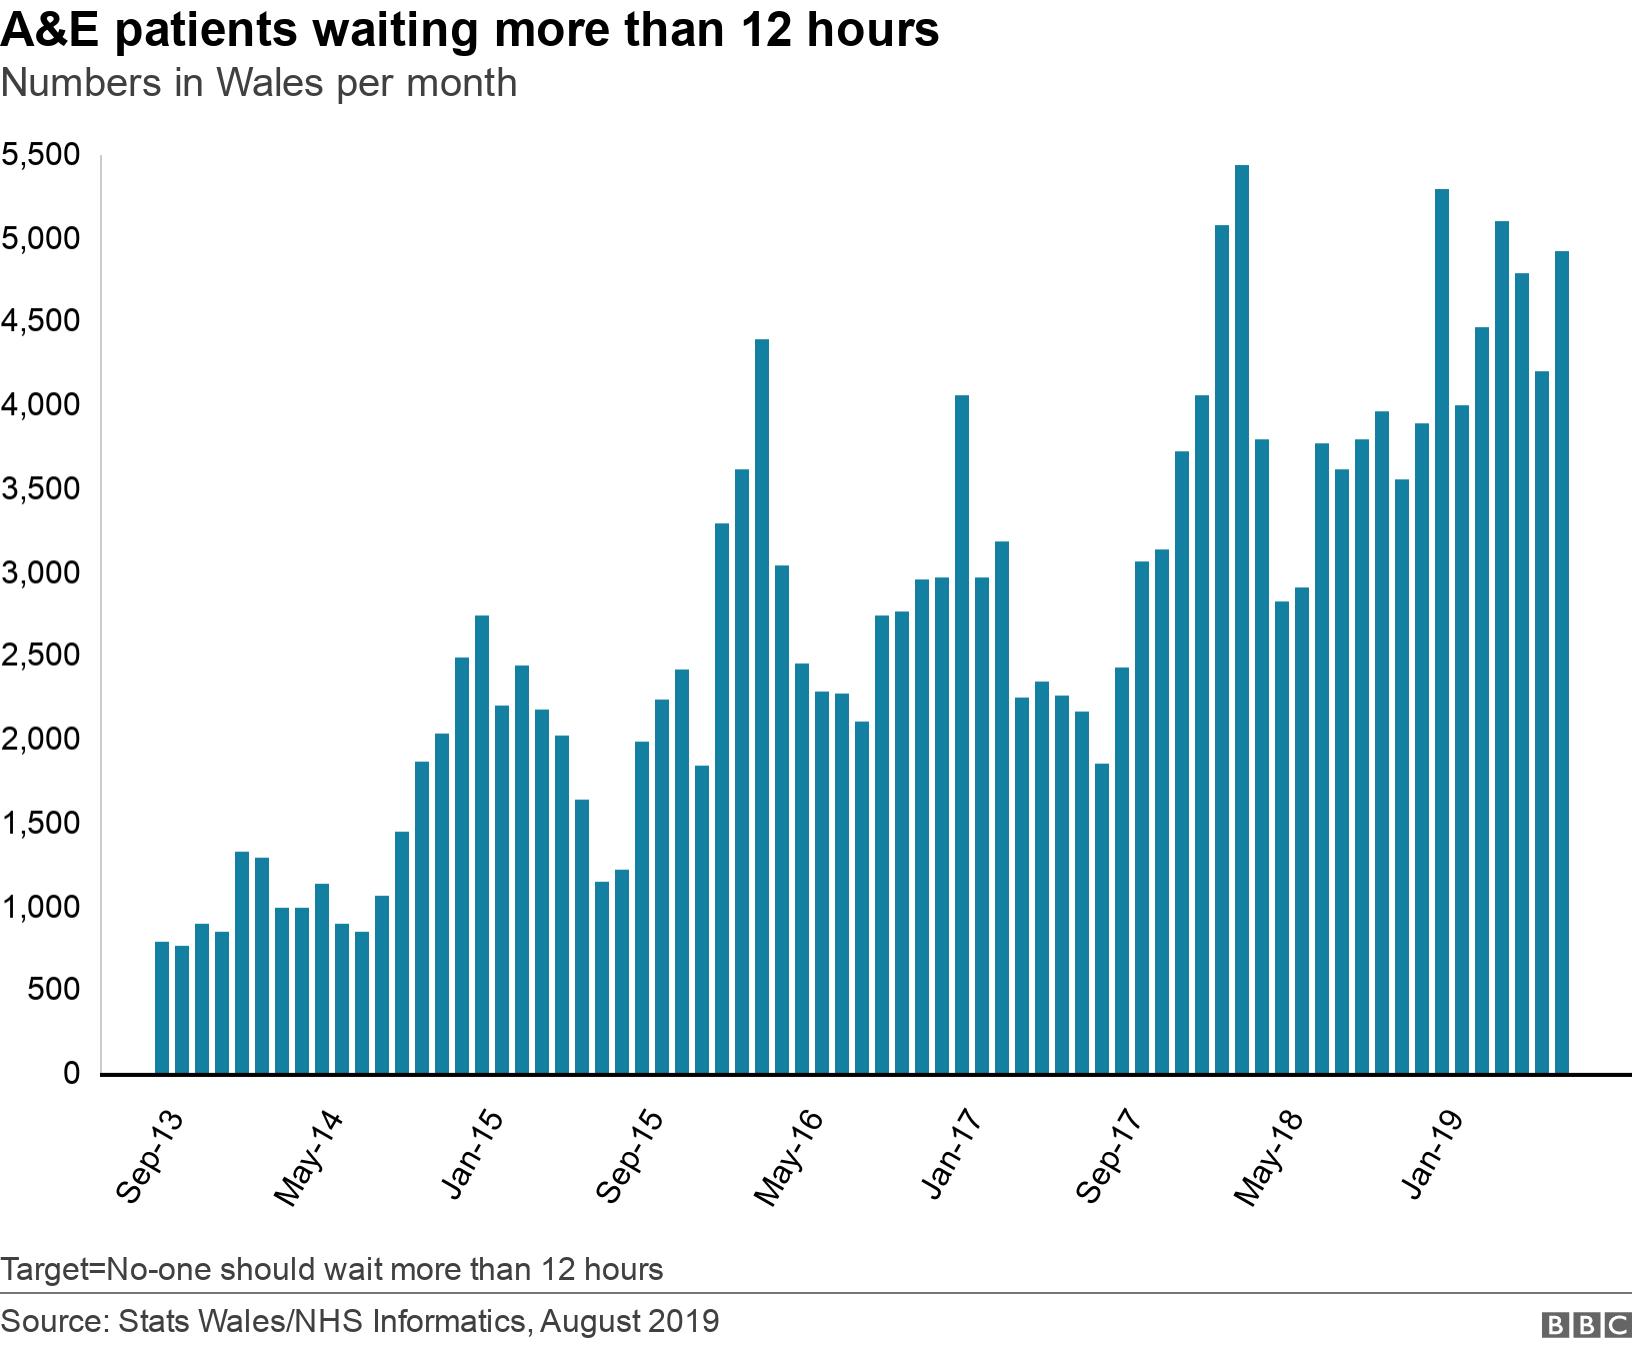 A&E patients waiting more than 12 hours. Numbers in Wales per month. Numbers of patients waiting 12hrs or more in A&E Target=No-one should wait more than 12 hours.